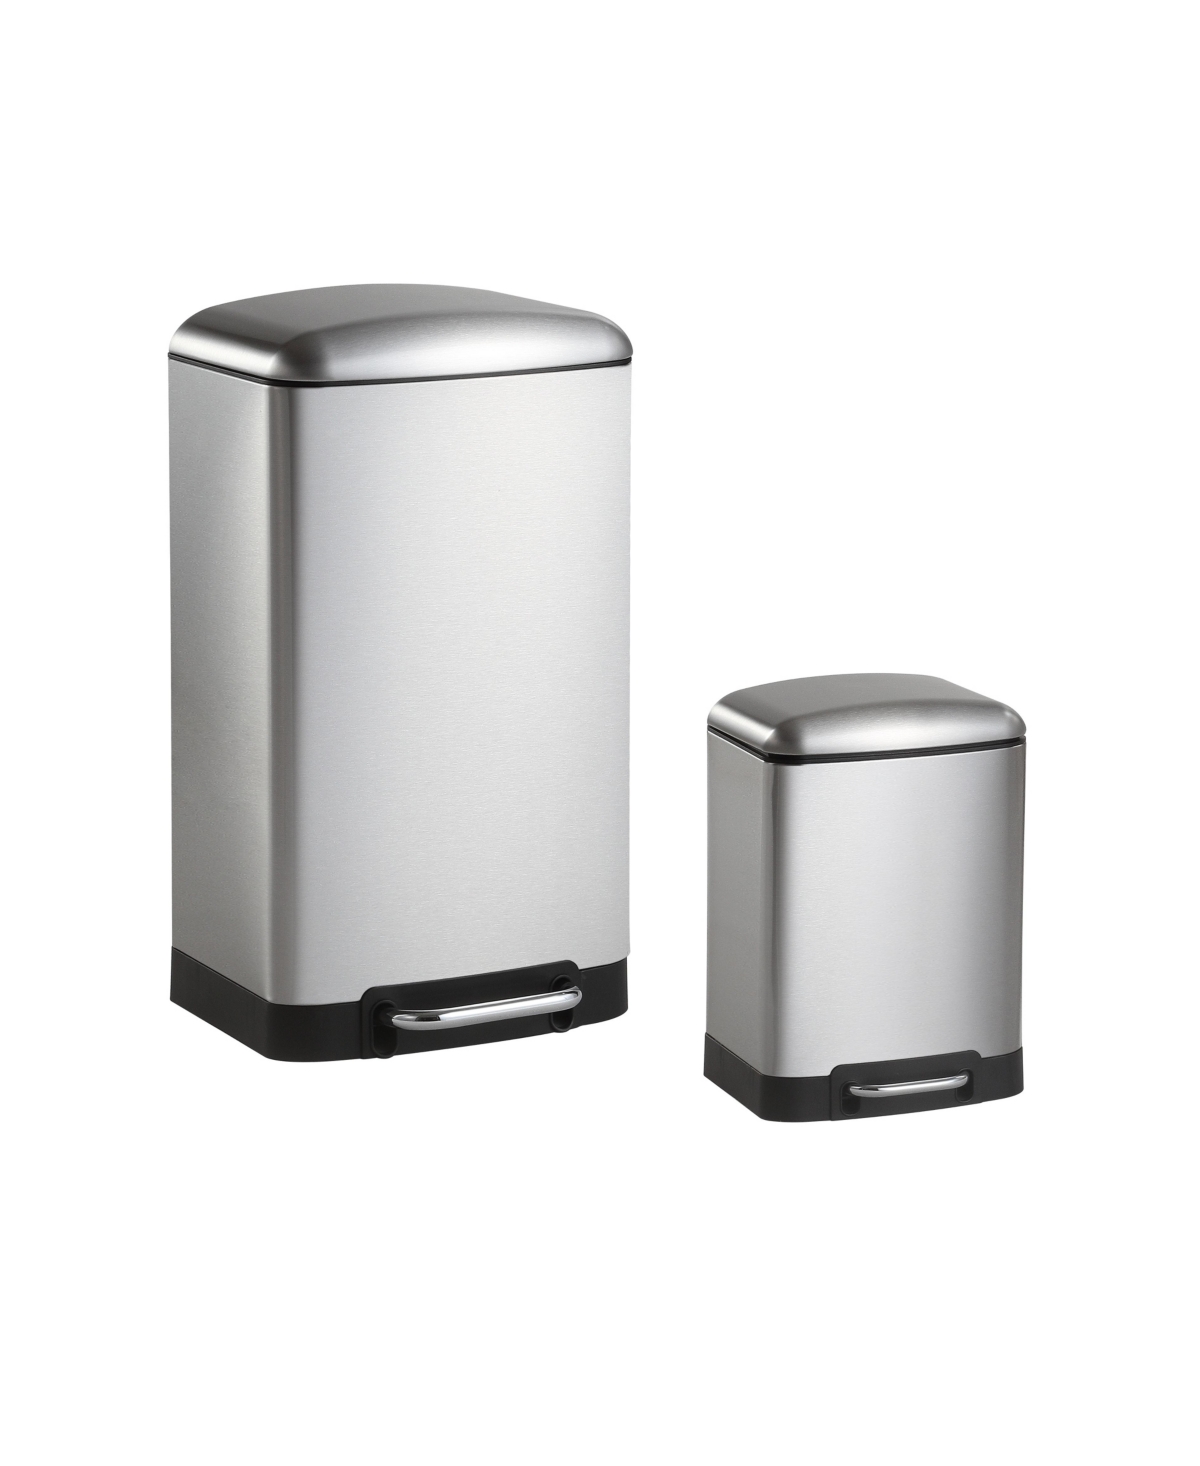 Ashley Rectangular Trash Can with Soft-Close Lid with Mini Trash Can - Stainless steel